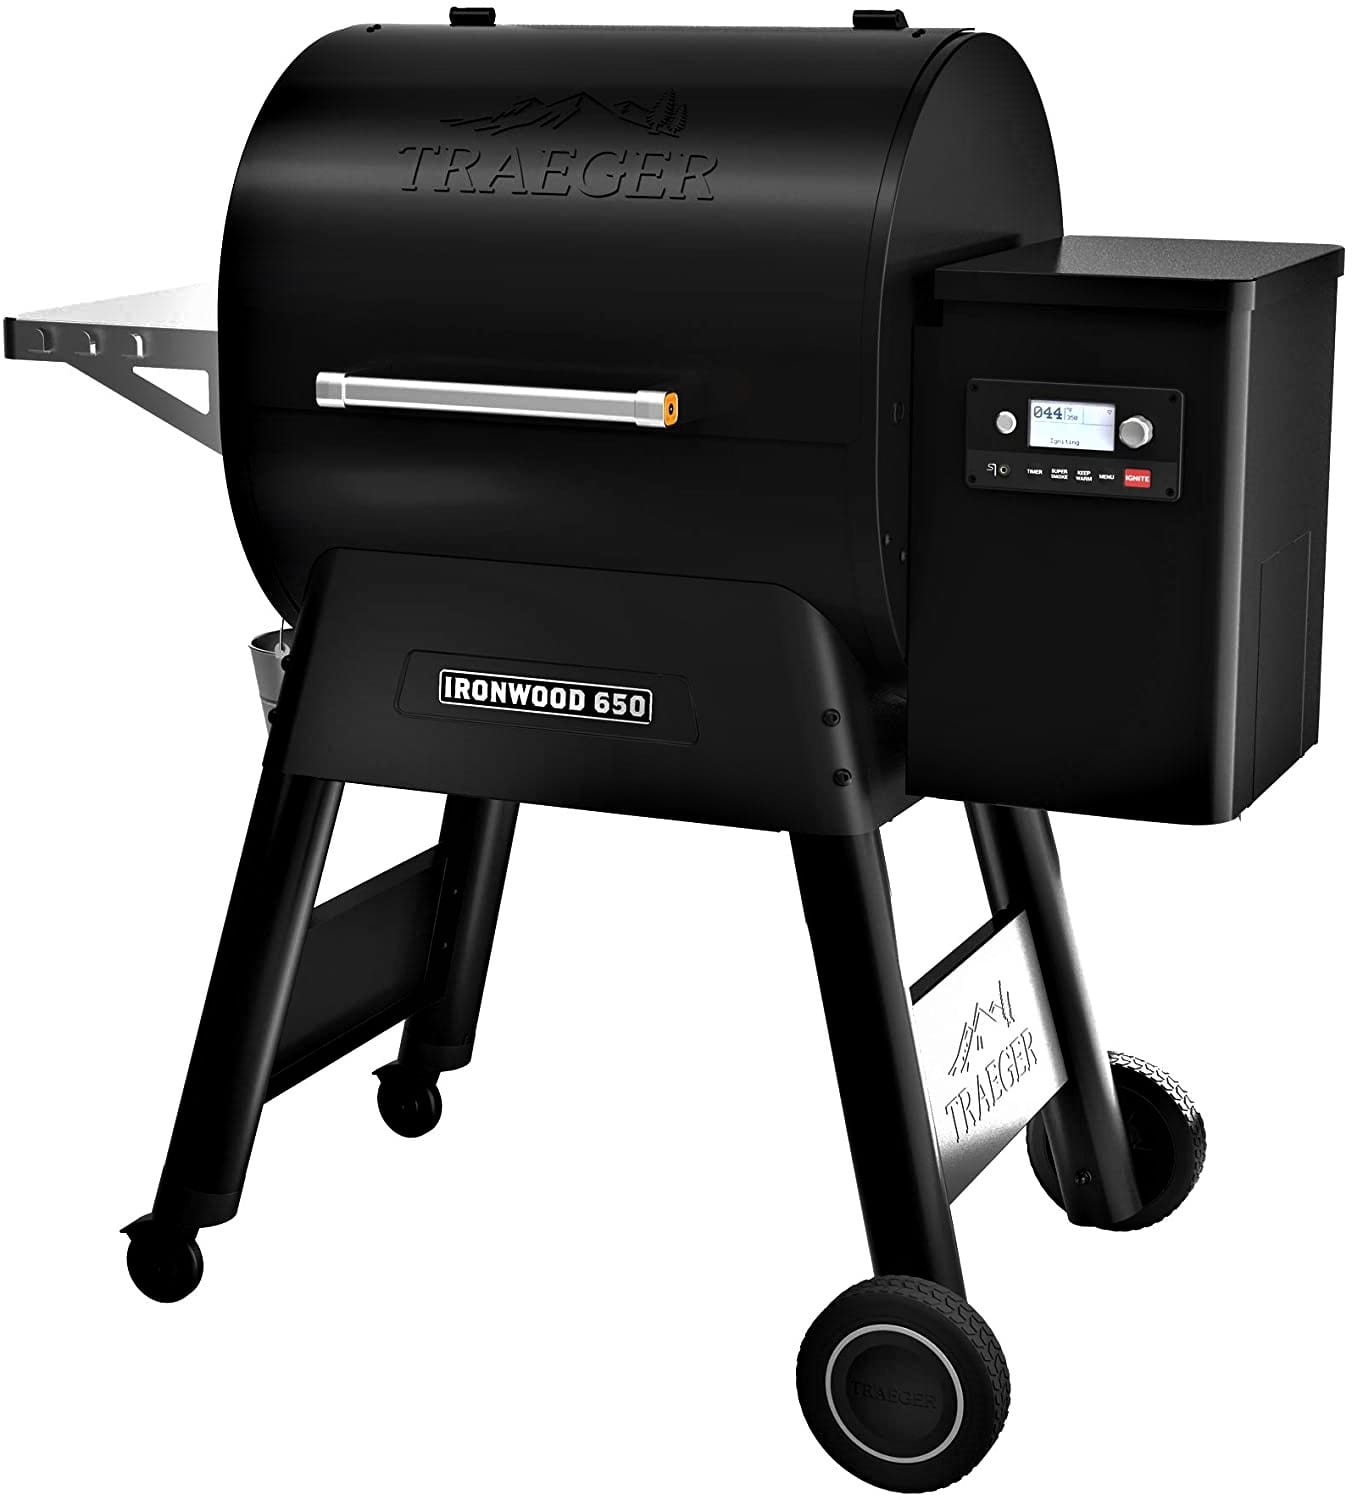 Traeger continues to develop appliances that are dependable and original. That philosophy is on full display in the Traeger Ironwood 650.